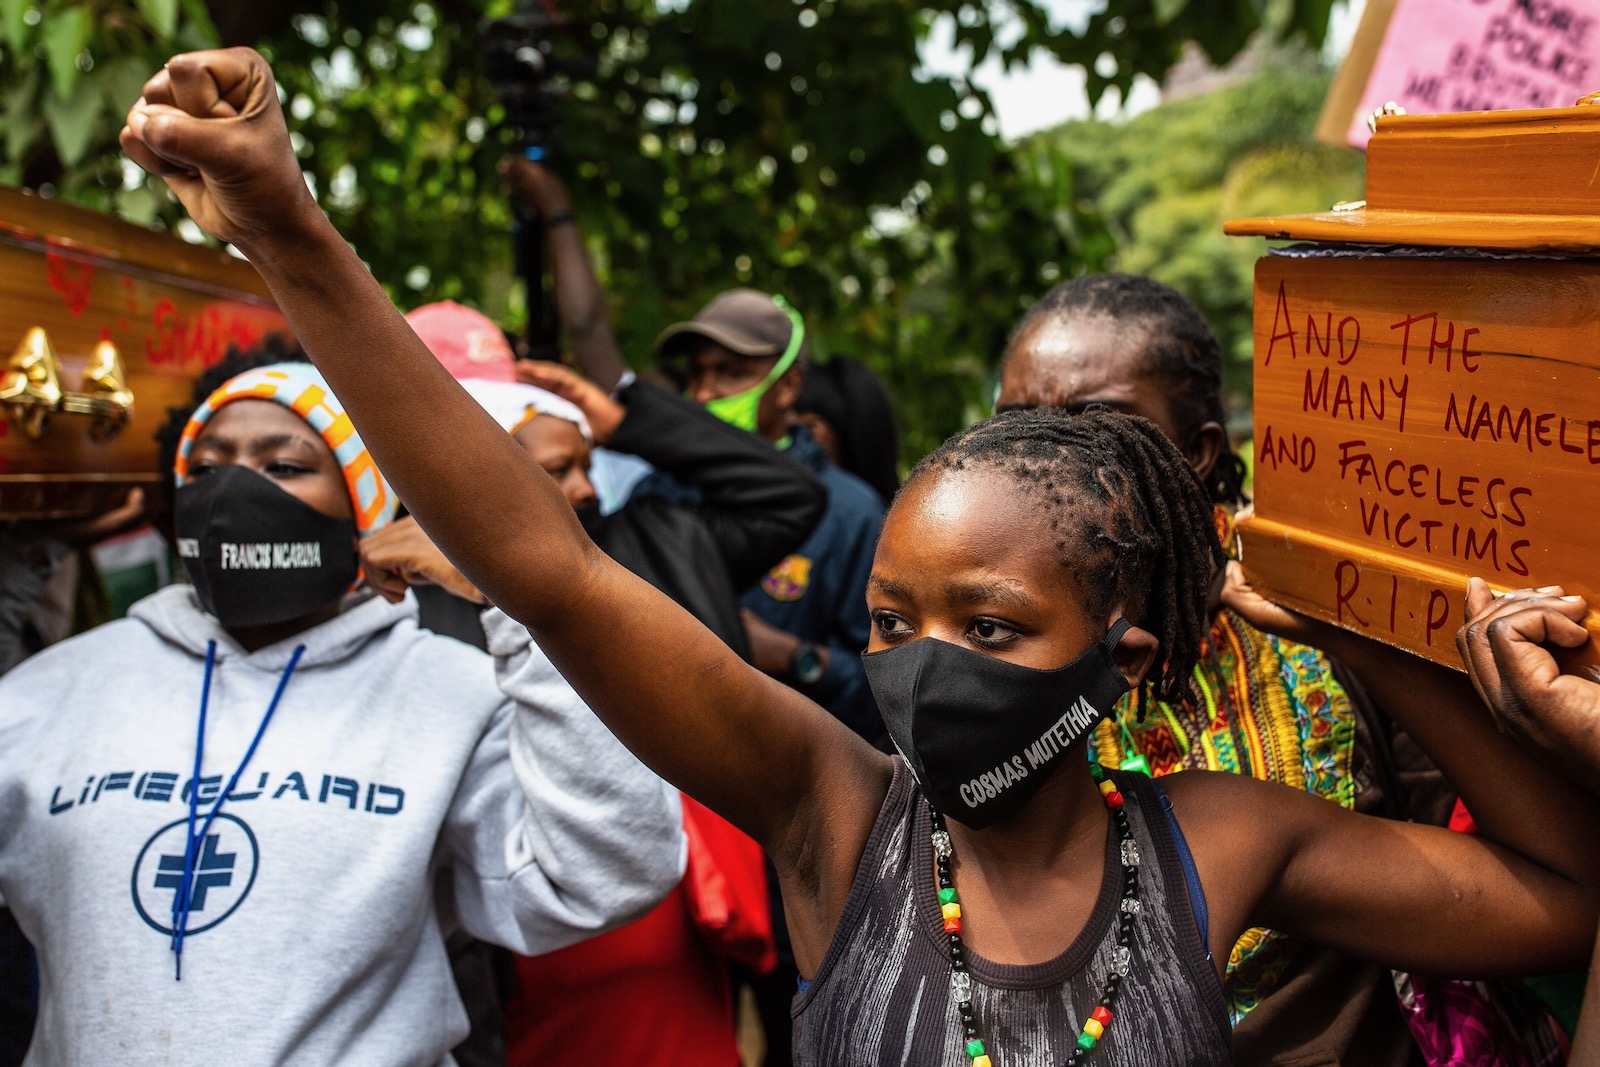 The widow of Cosmas Mutethia, who was killed by Kenyan police during a night curfew, helping to bear a symbolic coffin at a protest outside the Kenyan Parliament, Nairobi, Kenya, June 9, 2020